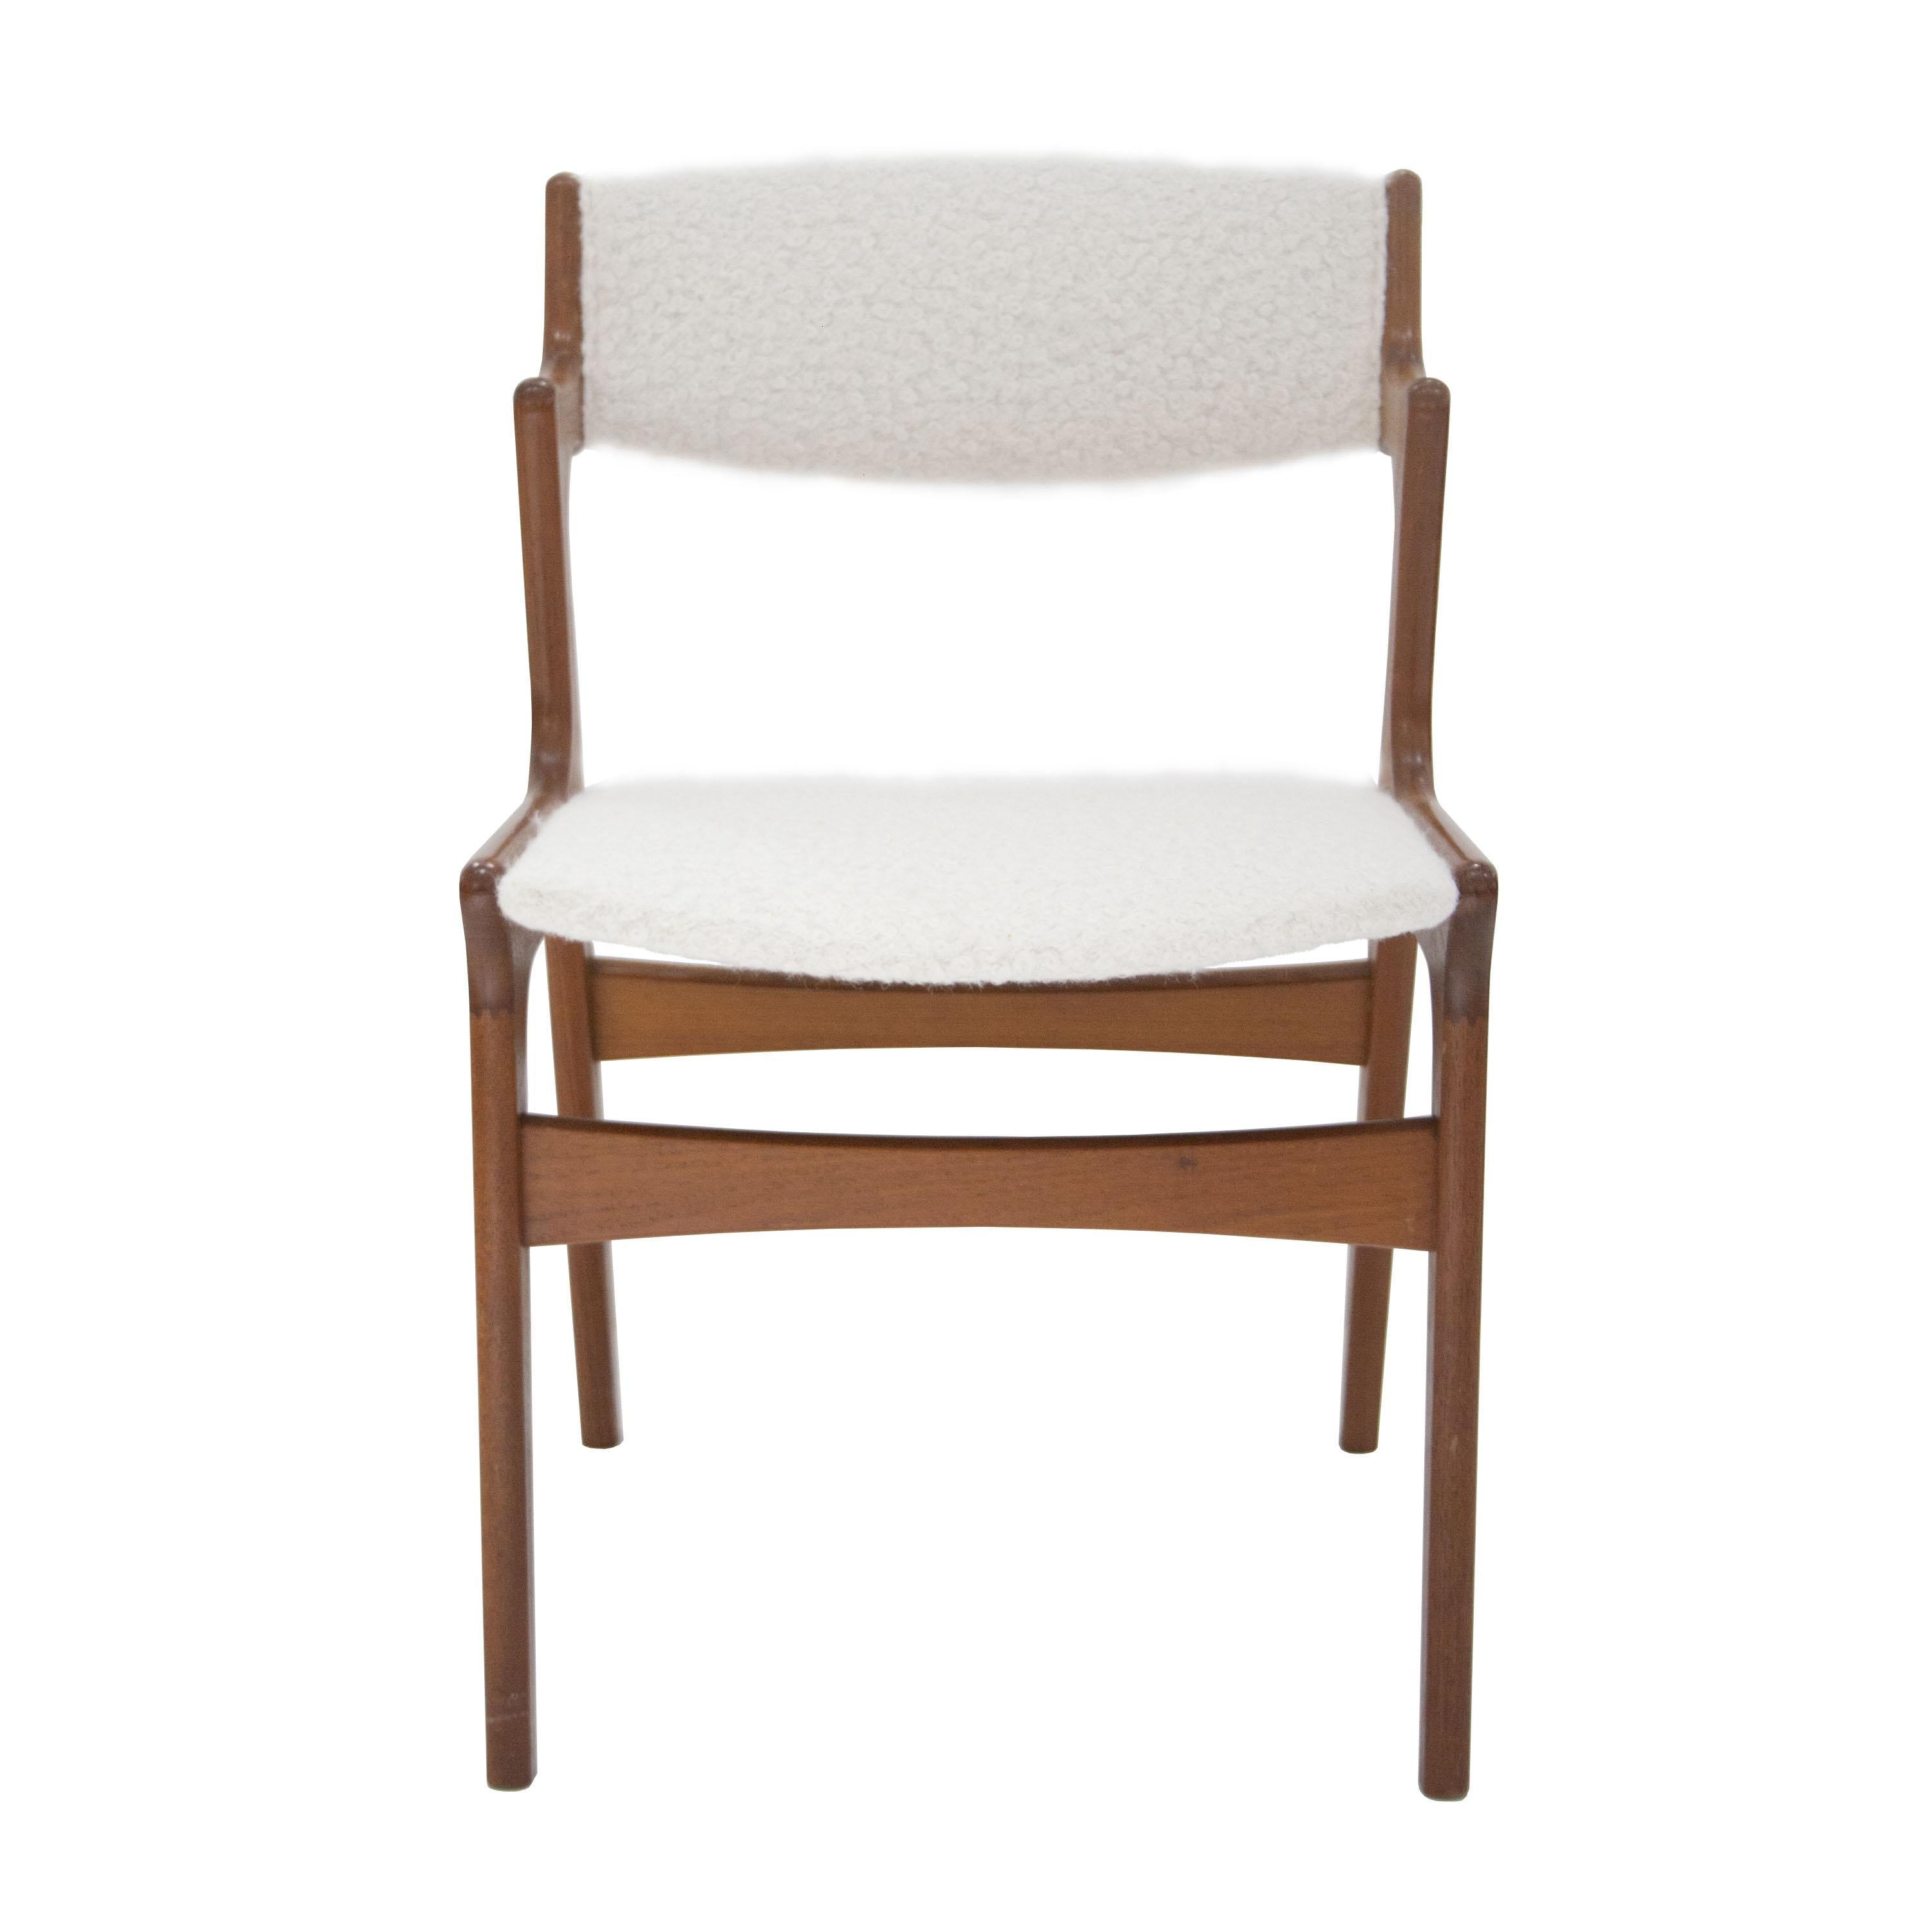 Set of four dining chairs in the style of Kai Kristiansen made of solid teak. Reupholstered in wool bouclé.